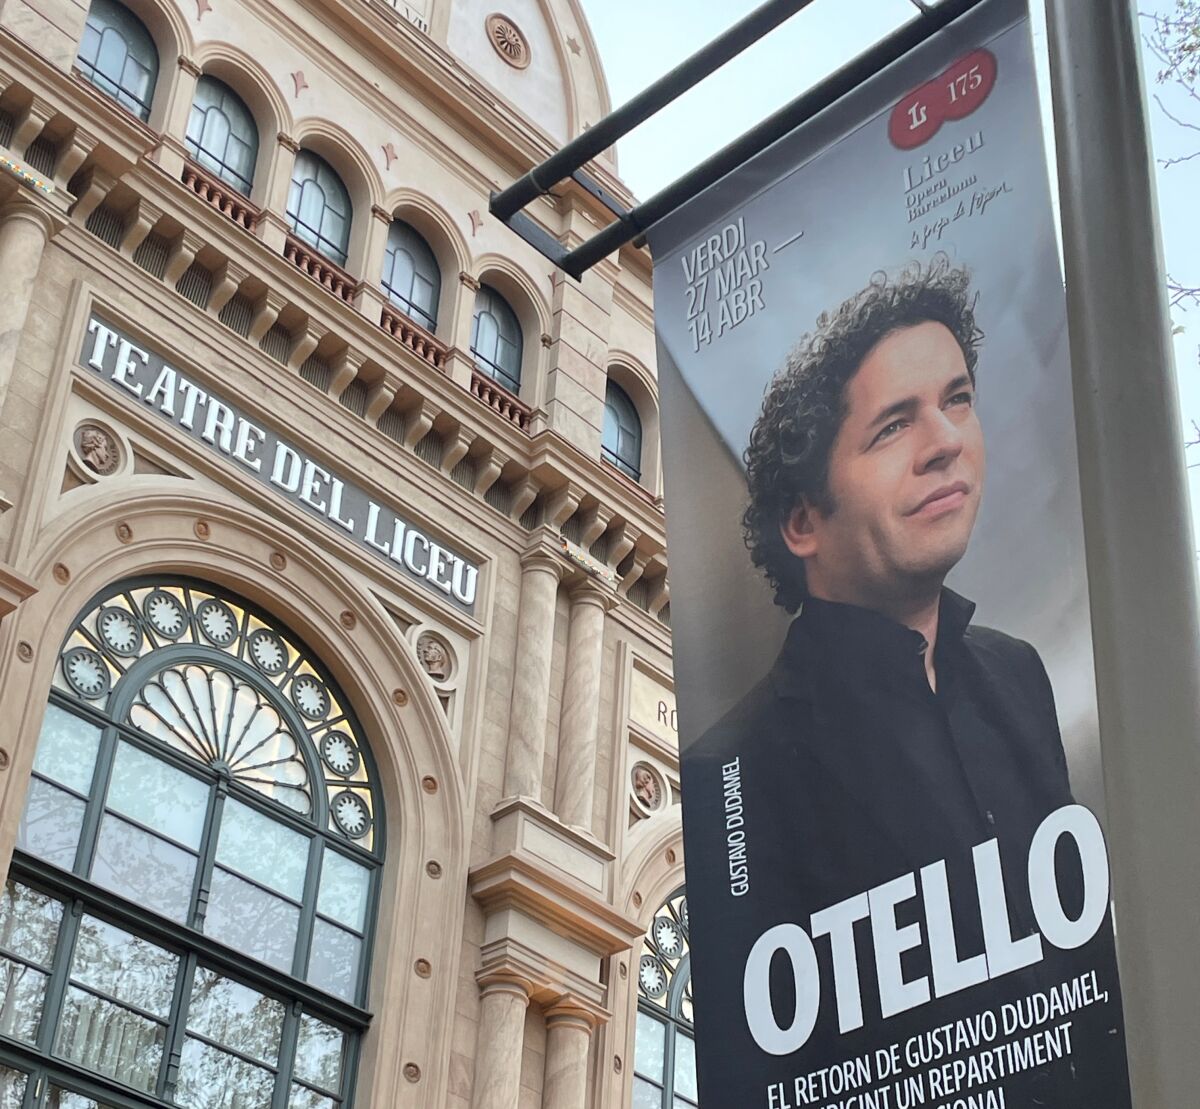 An "Otello" banner hangs outside the ornate windows and columns of a theater.